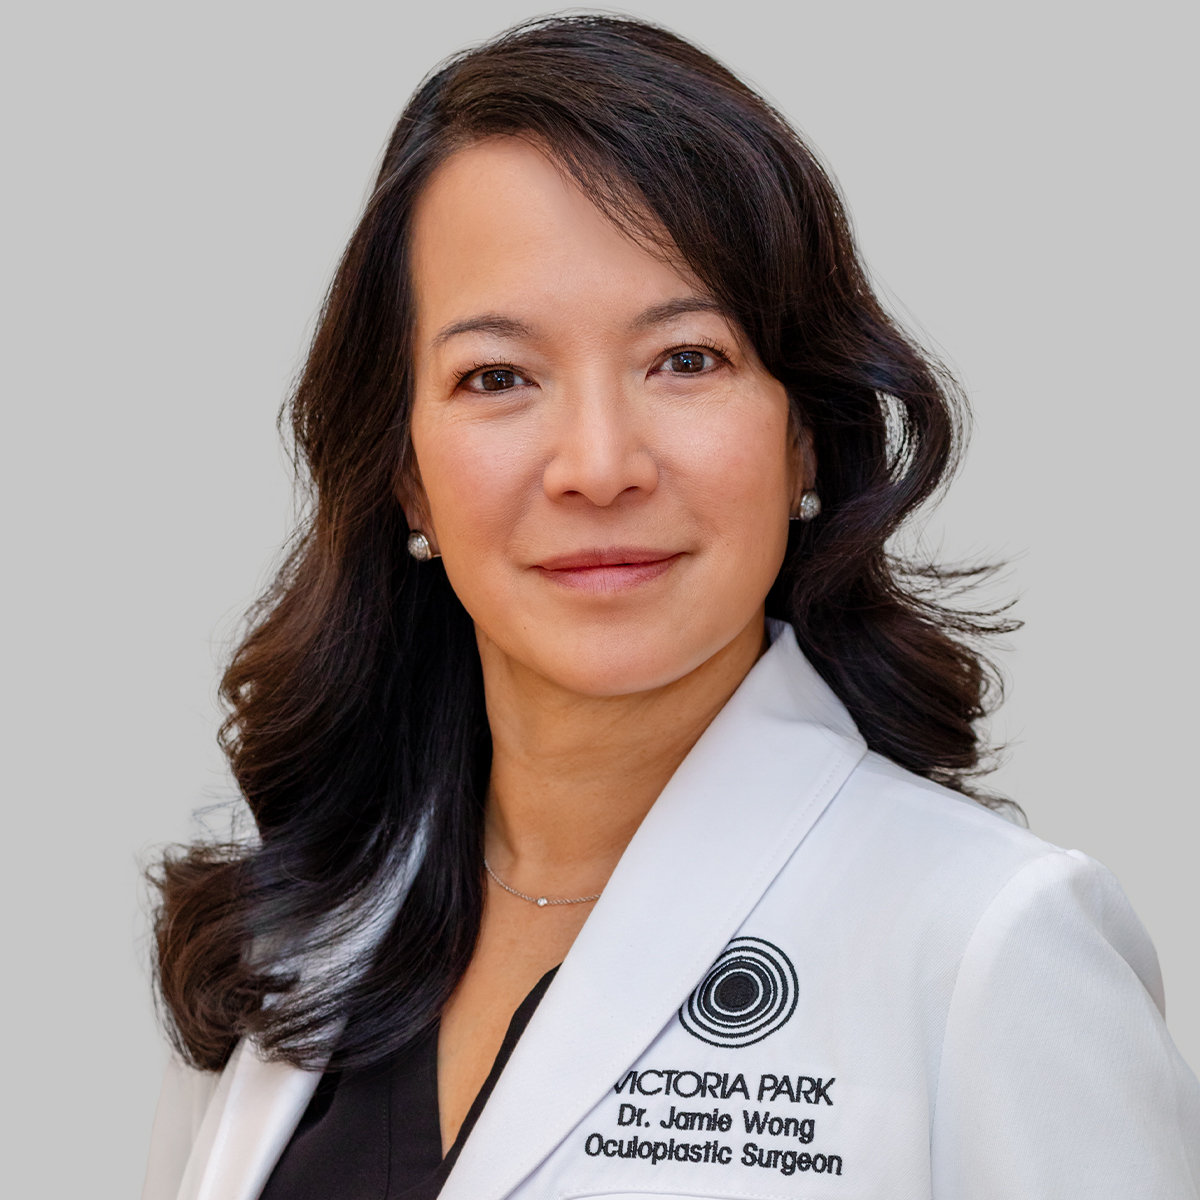 DR. JAMIE WONG OPHTHALMOLOGIST IN DOWNTOWN MONTREAL